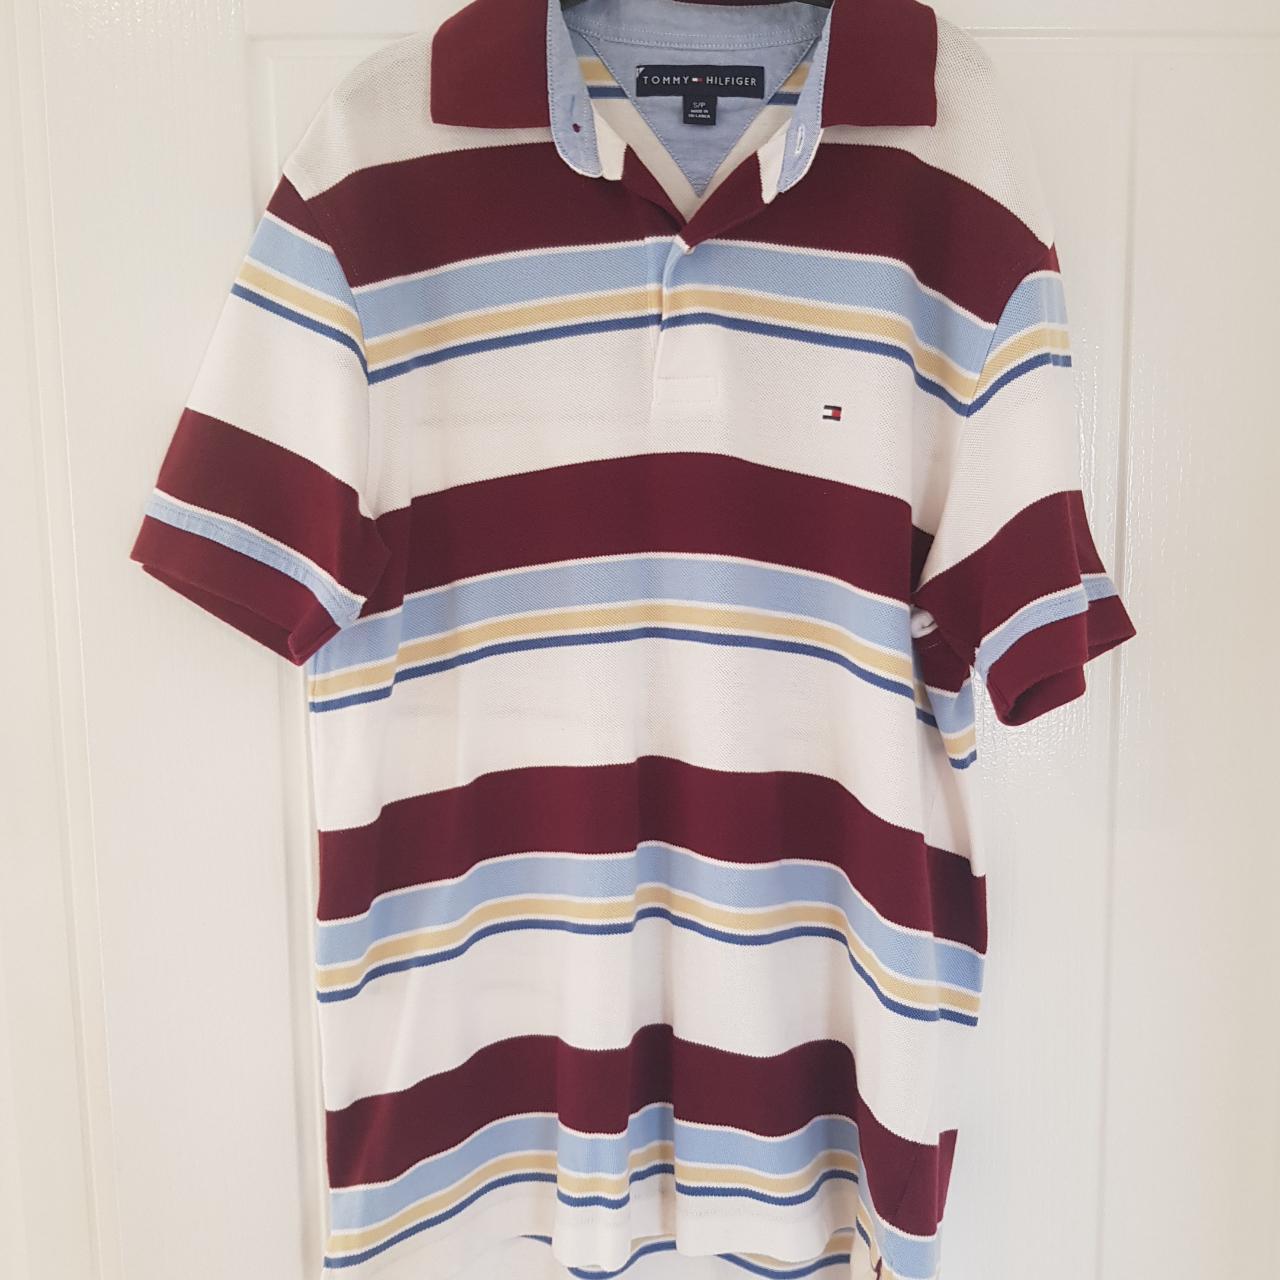 Tommy Hilfiger polo shirt. Very good condition size... - Depop